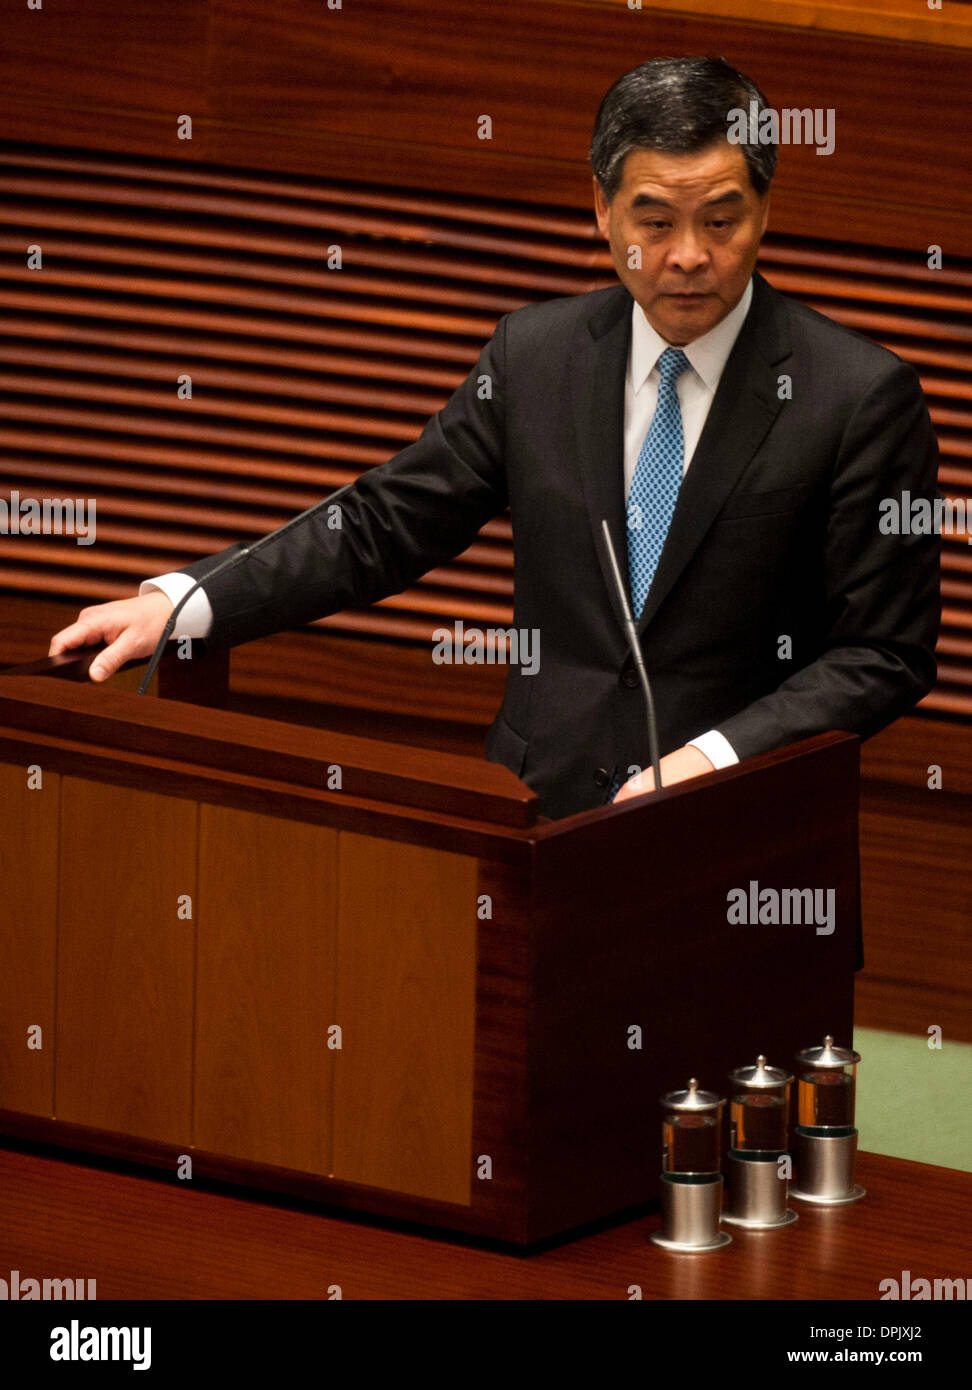 Hong Kong, China. 15th Jan, 2014. Leung Chun-ying, chief executive of Hong Kong Special Administrative Region (HKSAR), delivers his second policy address at the Legislative Council in Hong Kong, south China, Jan. 15, 2014. Leung pledged Wednesday to further strengthen Hong Kong's position as an international and regional logistics centre. © Lui Siu Wai/Xinhua/Alamy Live News Stock Photo